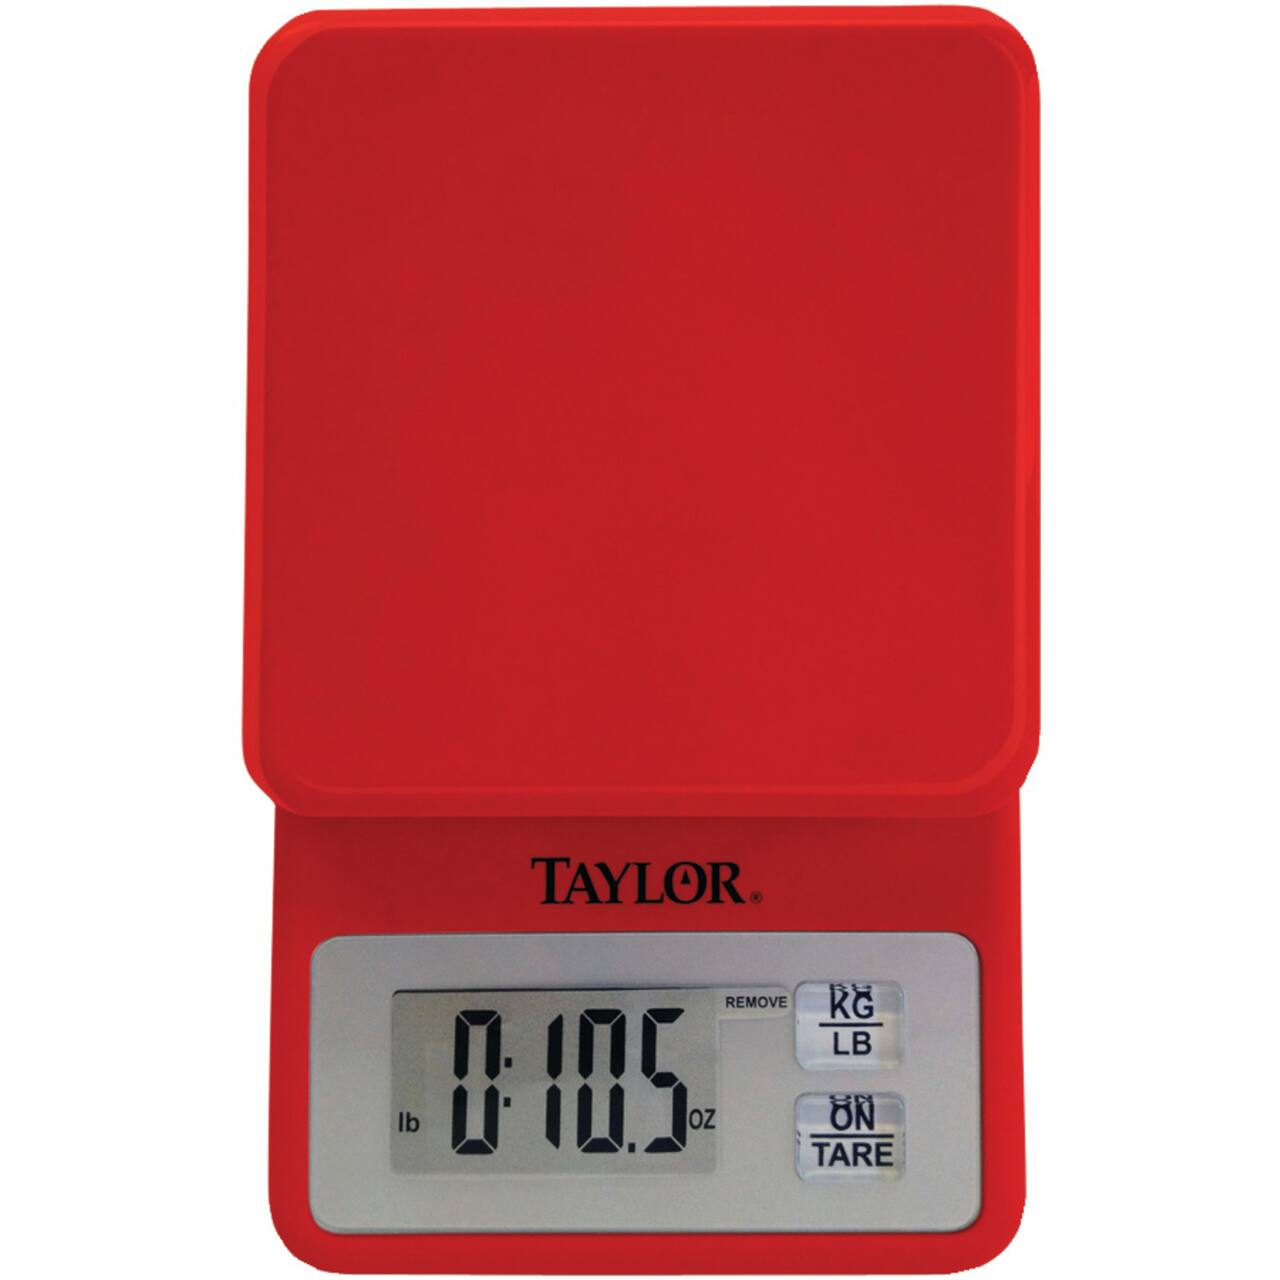 Taylor® 11lb. Capacity Compact Kitchen Scale